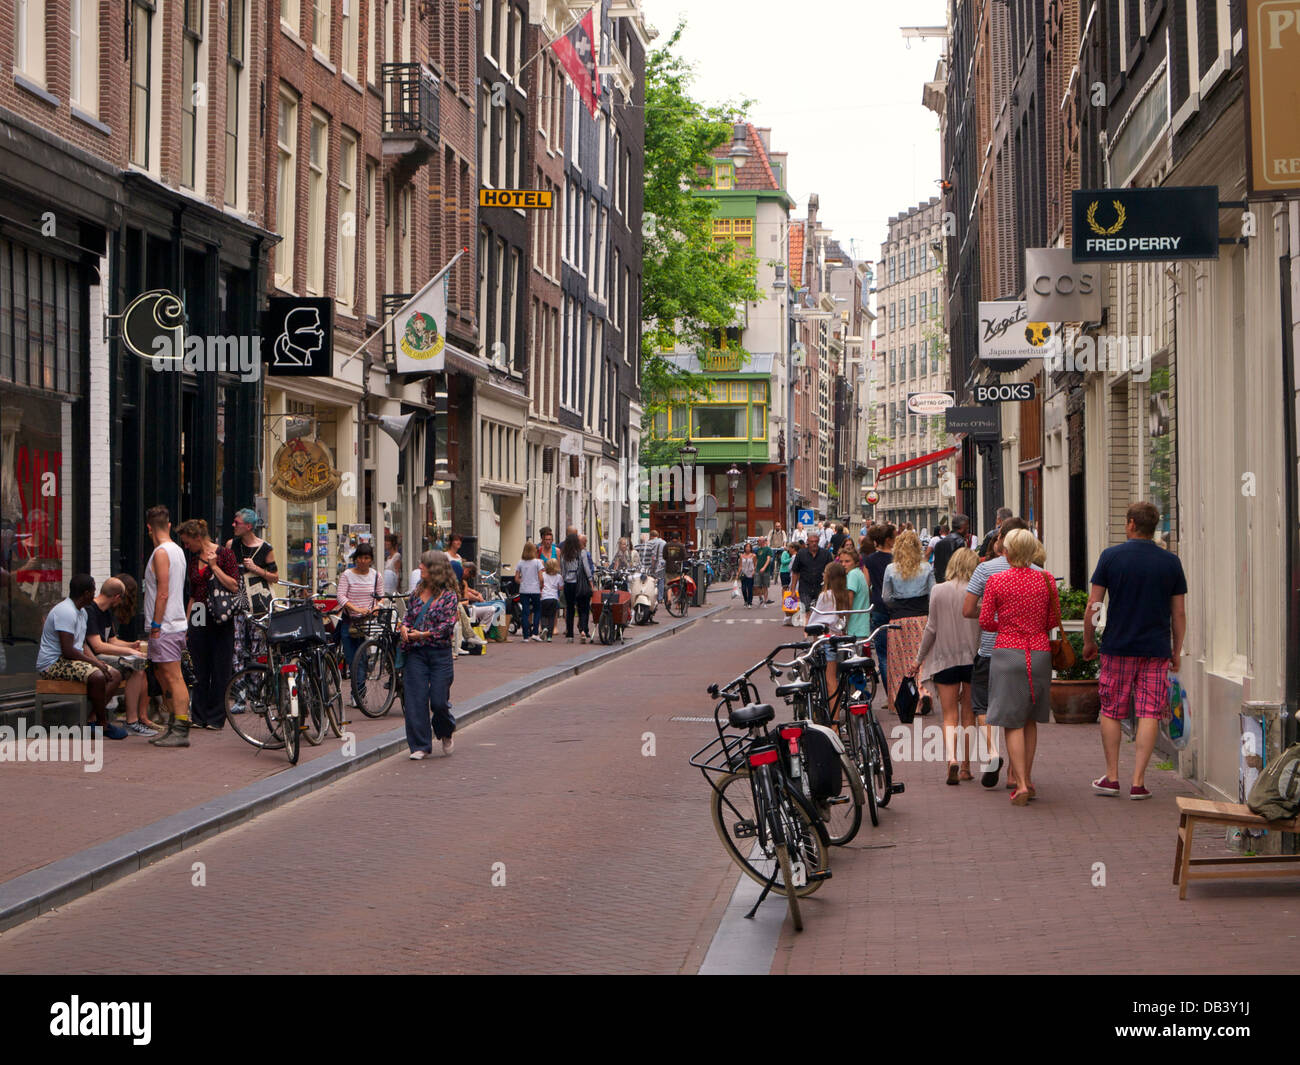 People shopping in the 'nine little streets' in the Jordaan quarter of Amsterdam, the Netherlands Stock Photo